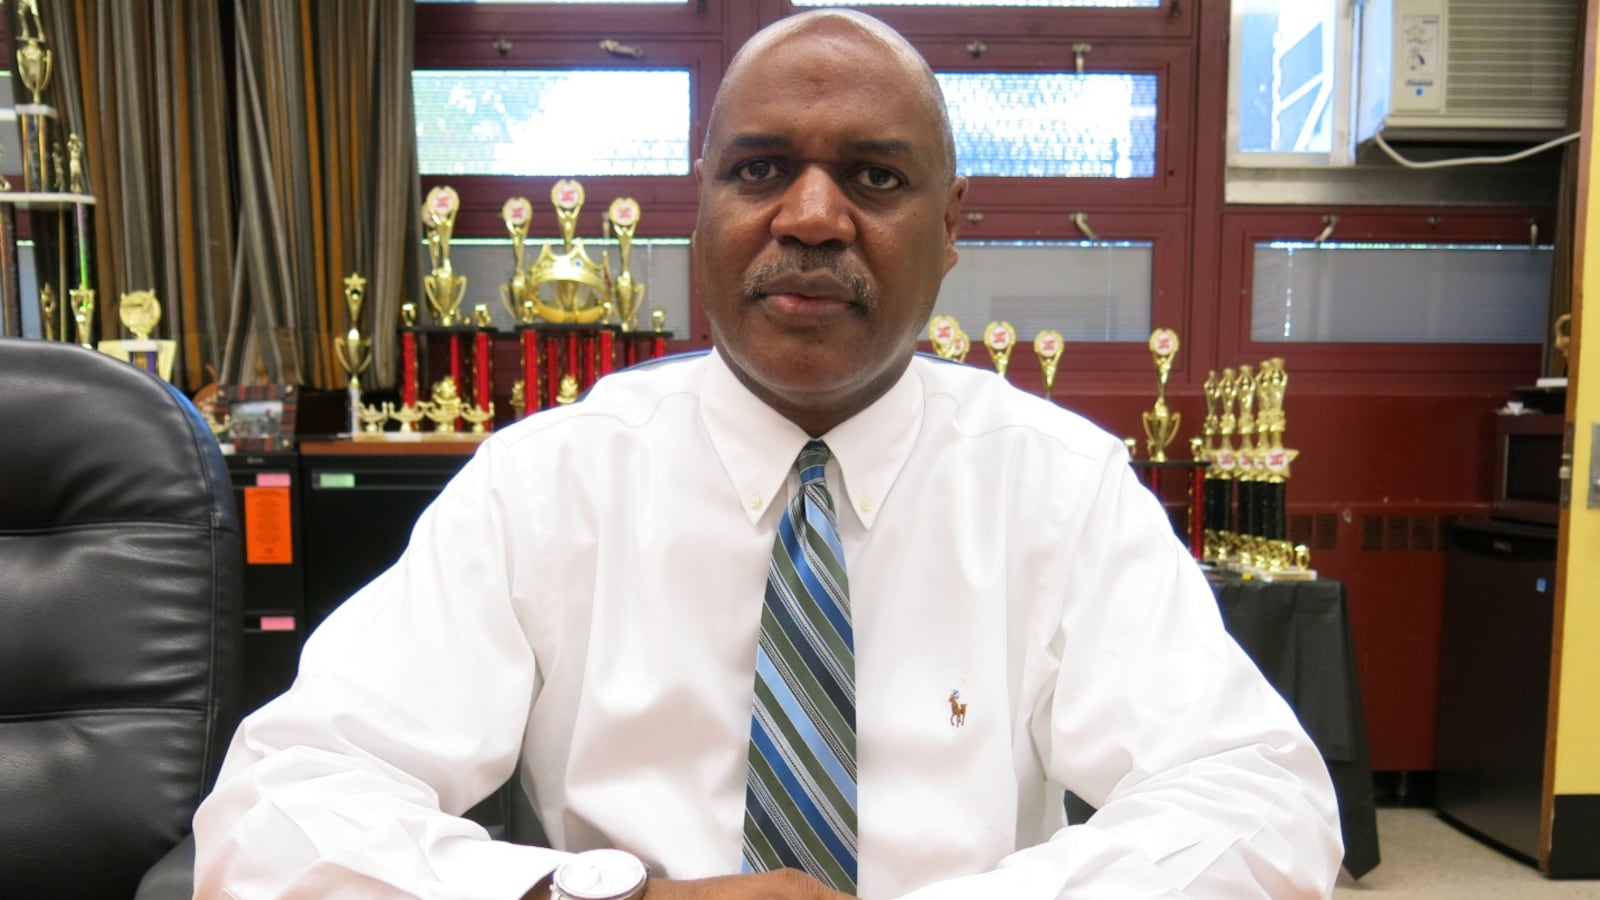 Bernard Gassaway, the principal of Boys and Girls High School, said he is resigning because he does not think the city's plan to improve the school will work.